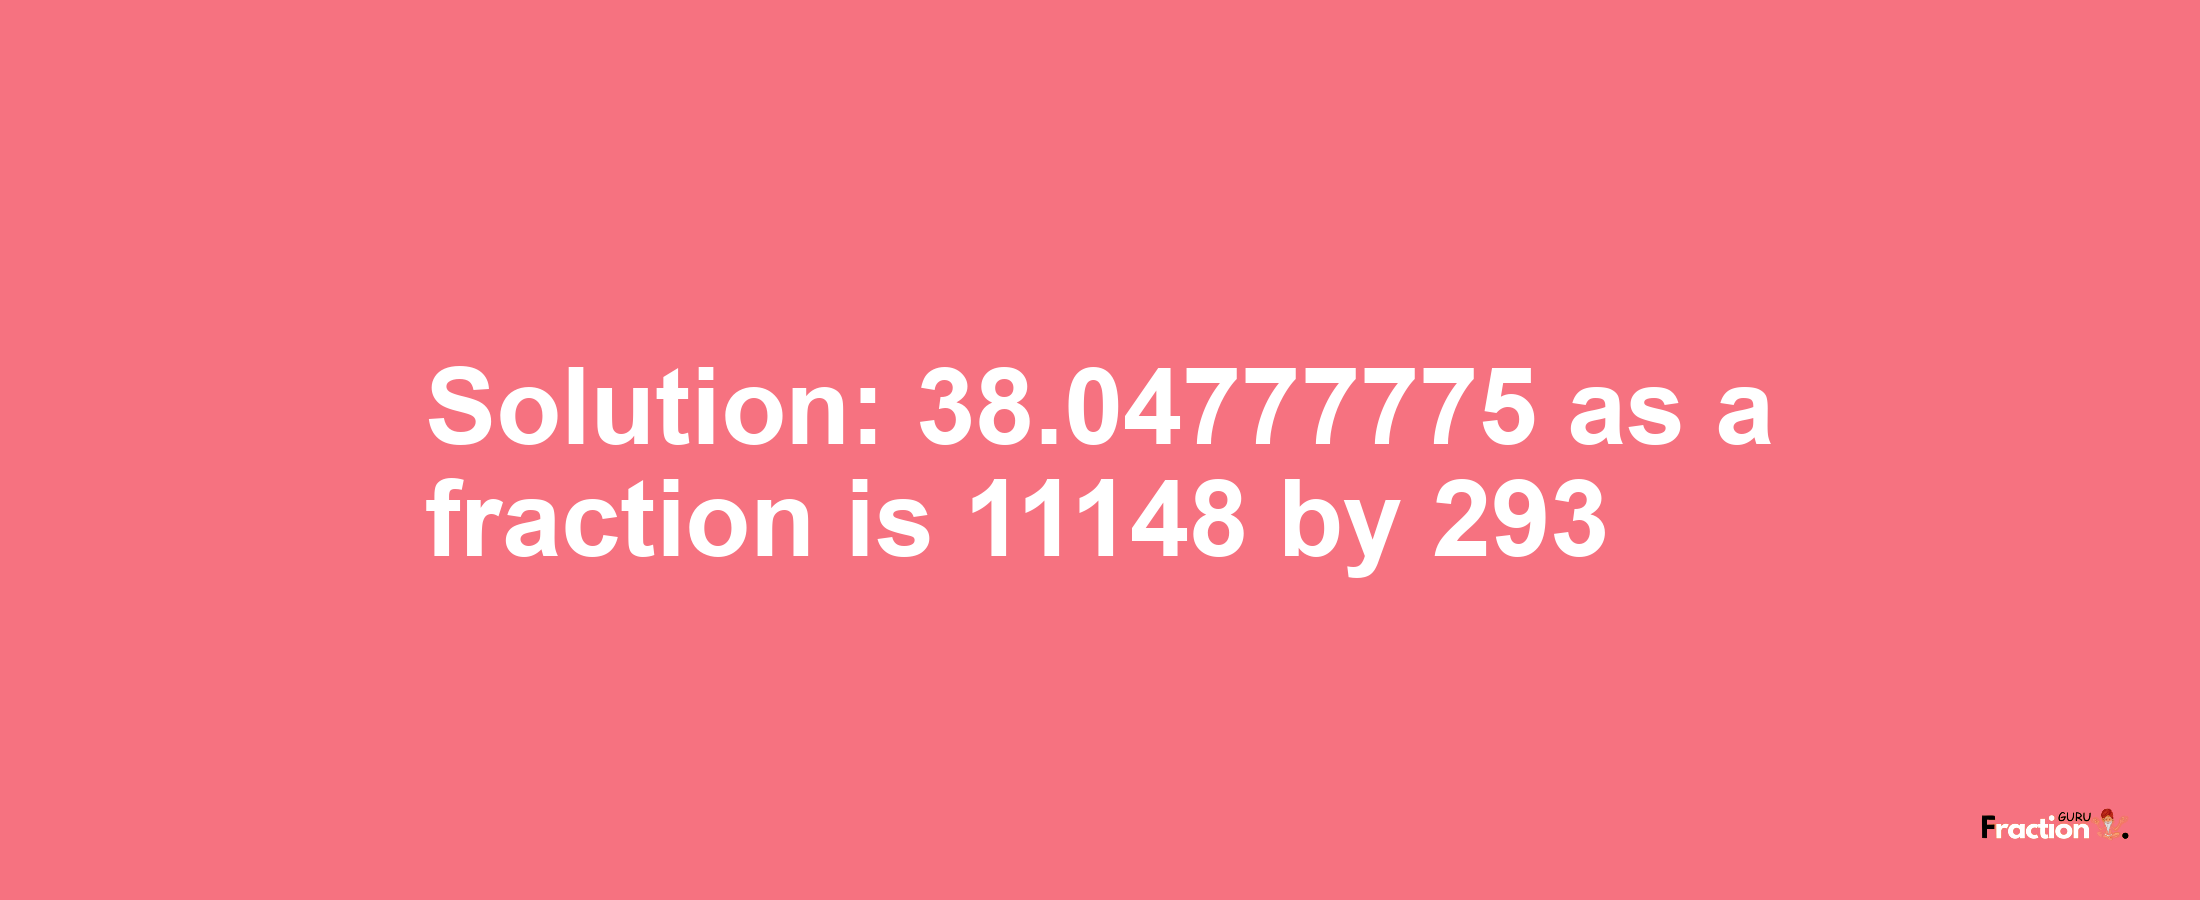 Solution:38.04777775 as a fraction is 11148/293